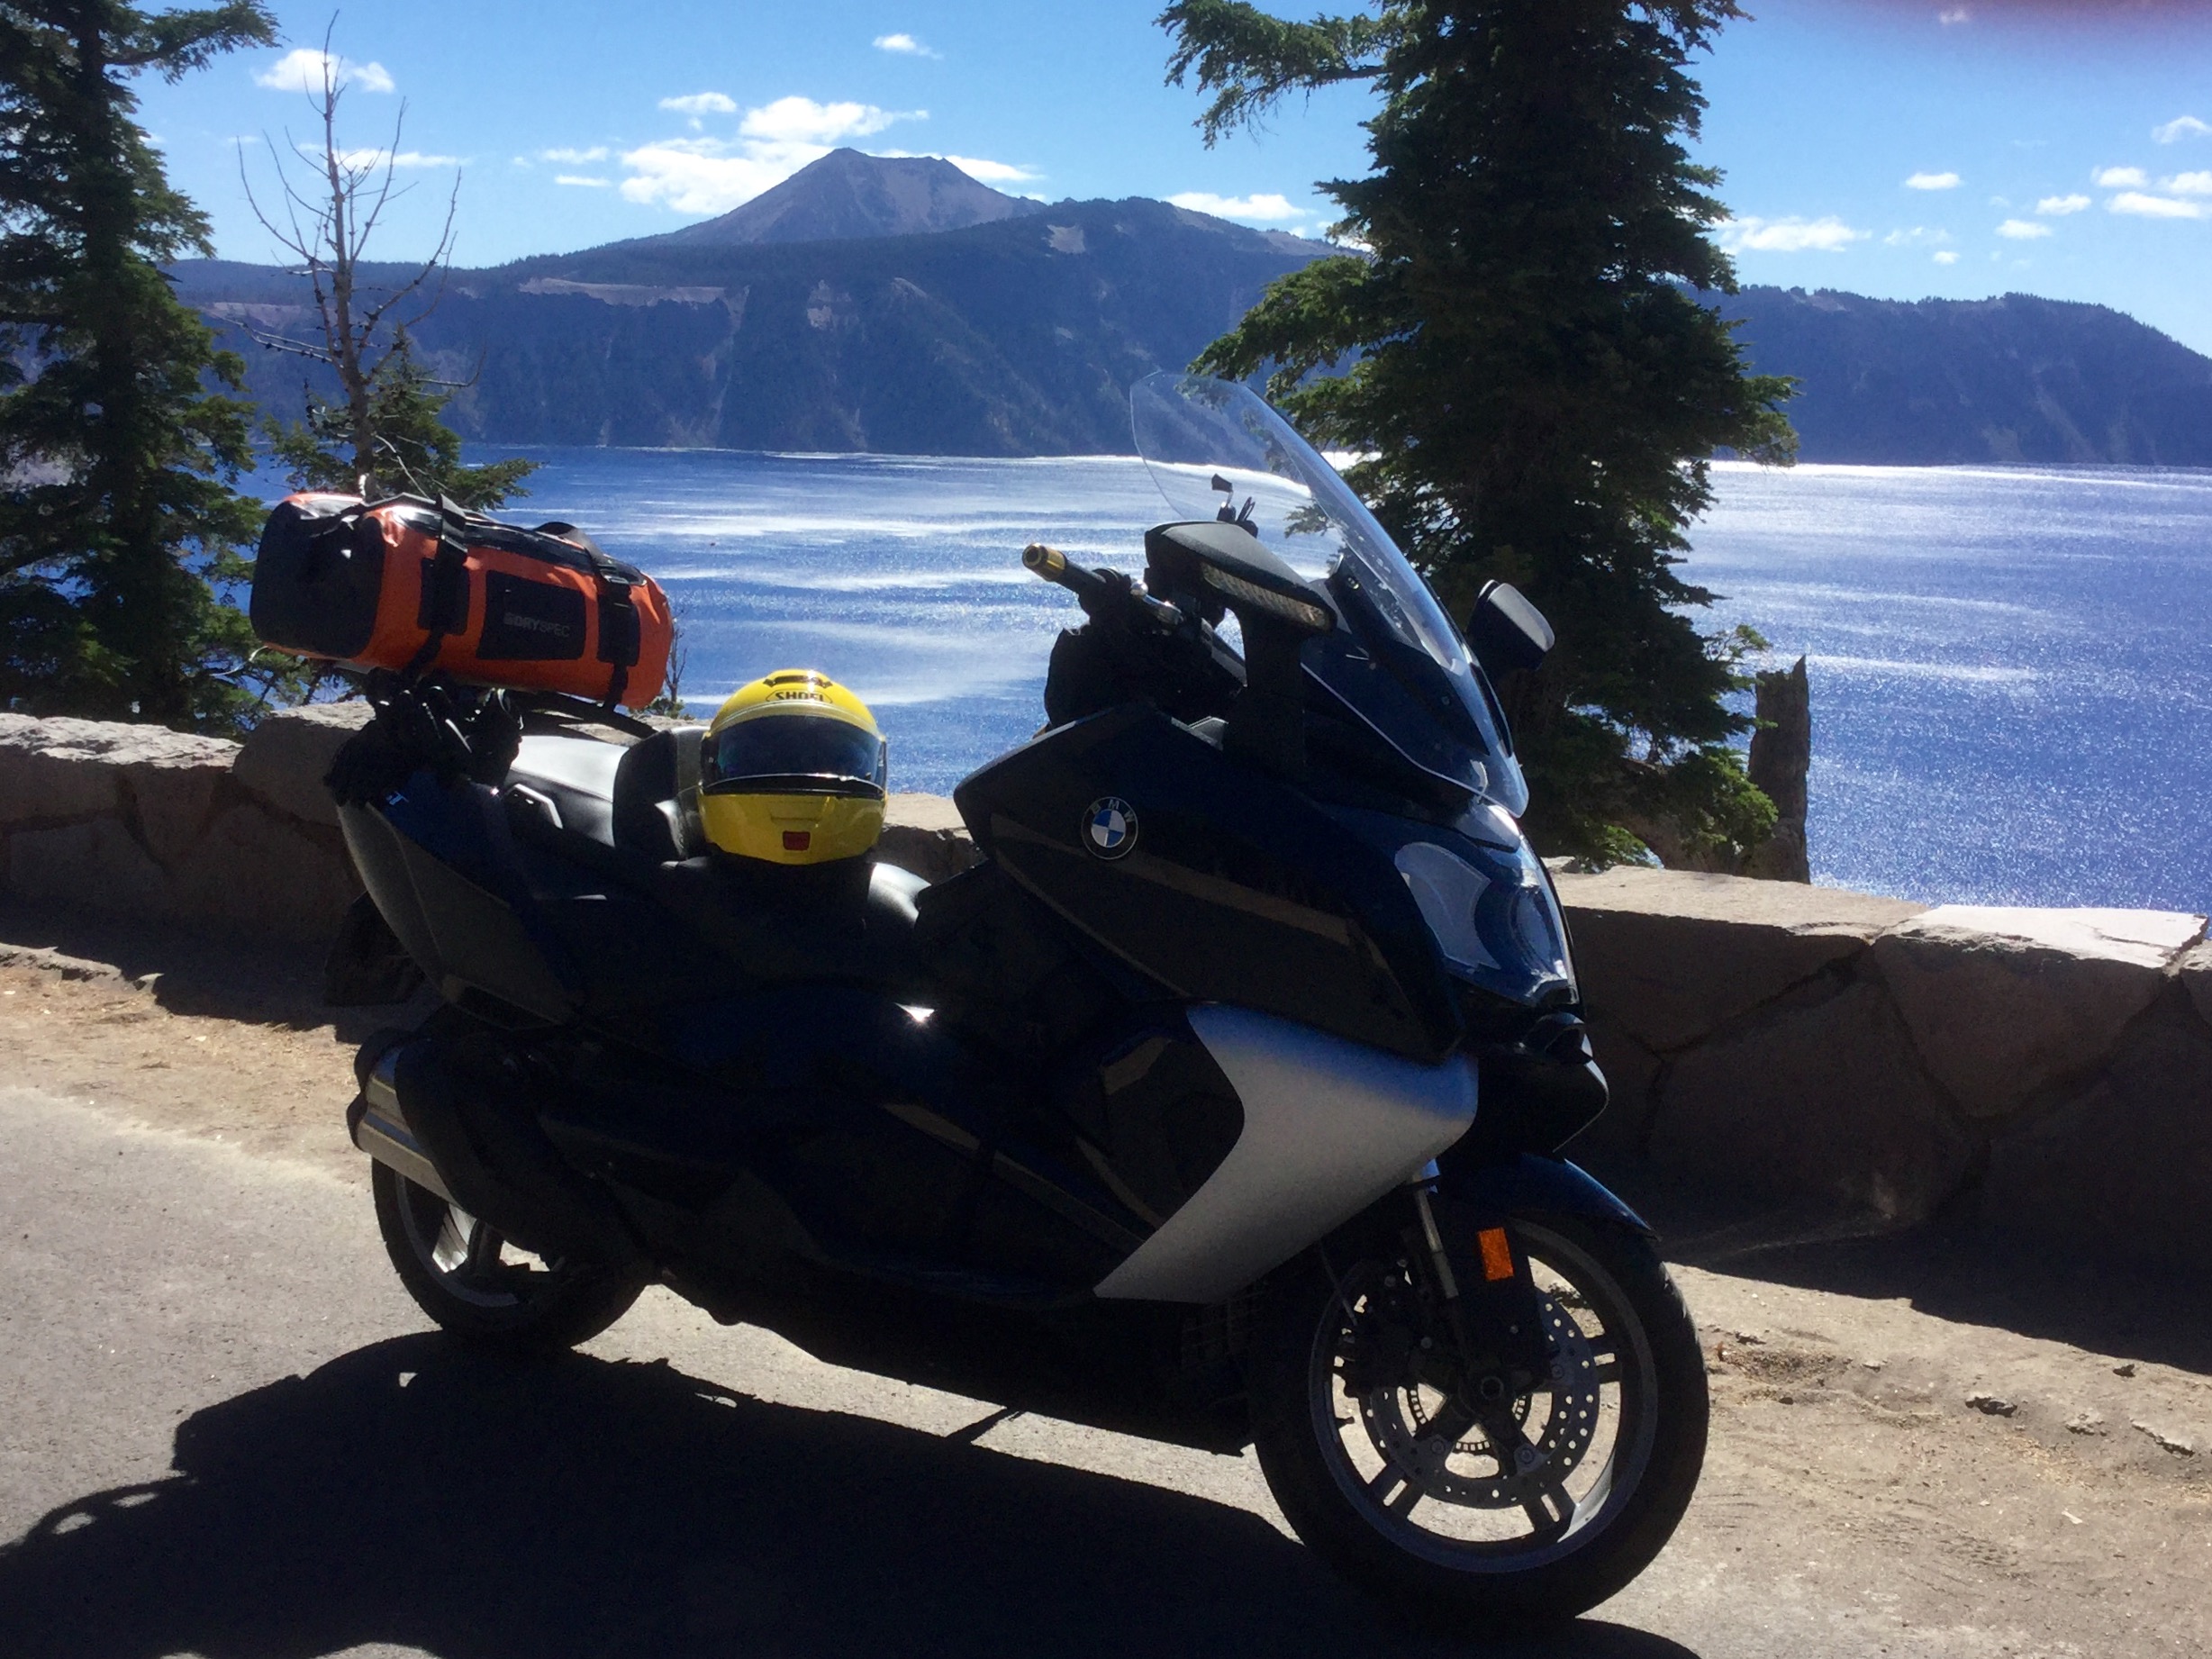 Crater Lake ride Sept 2016